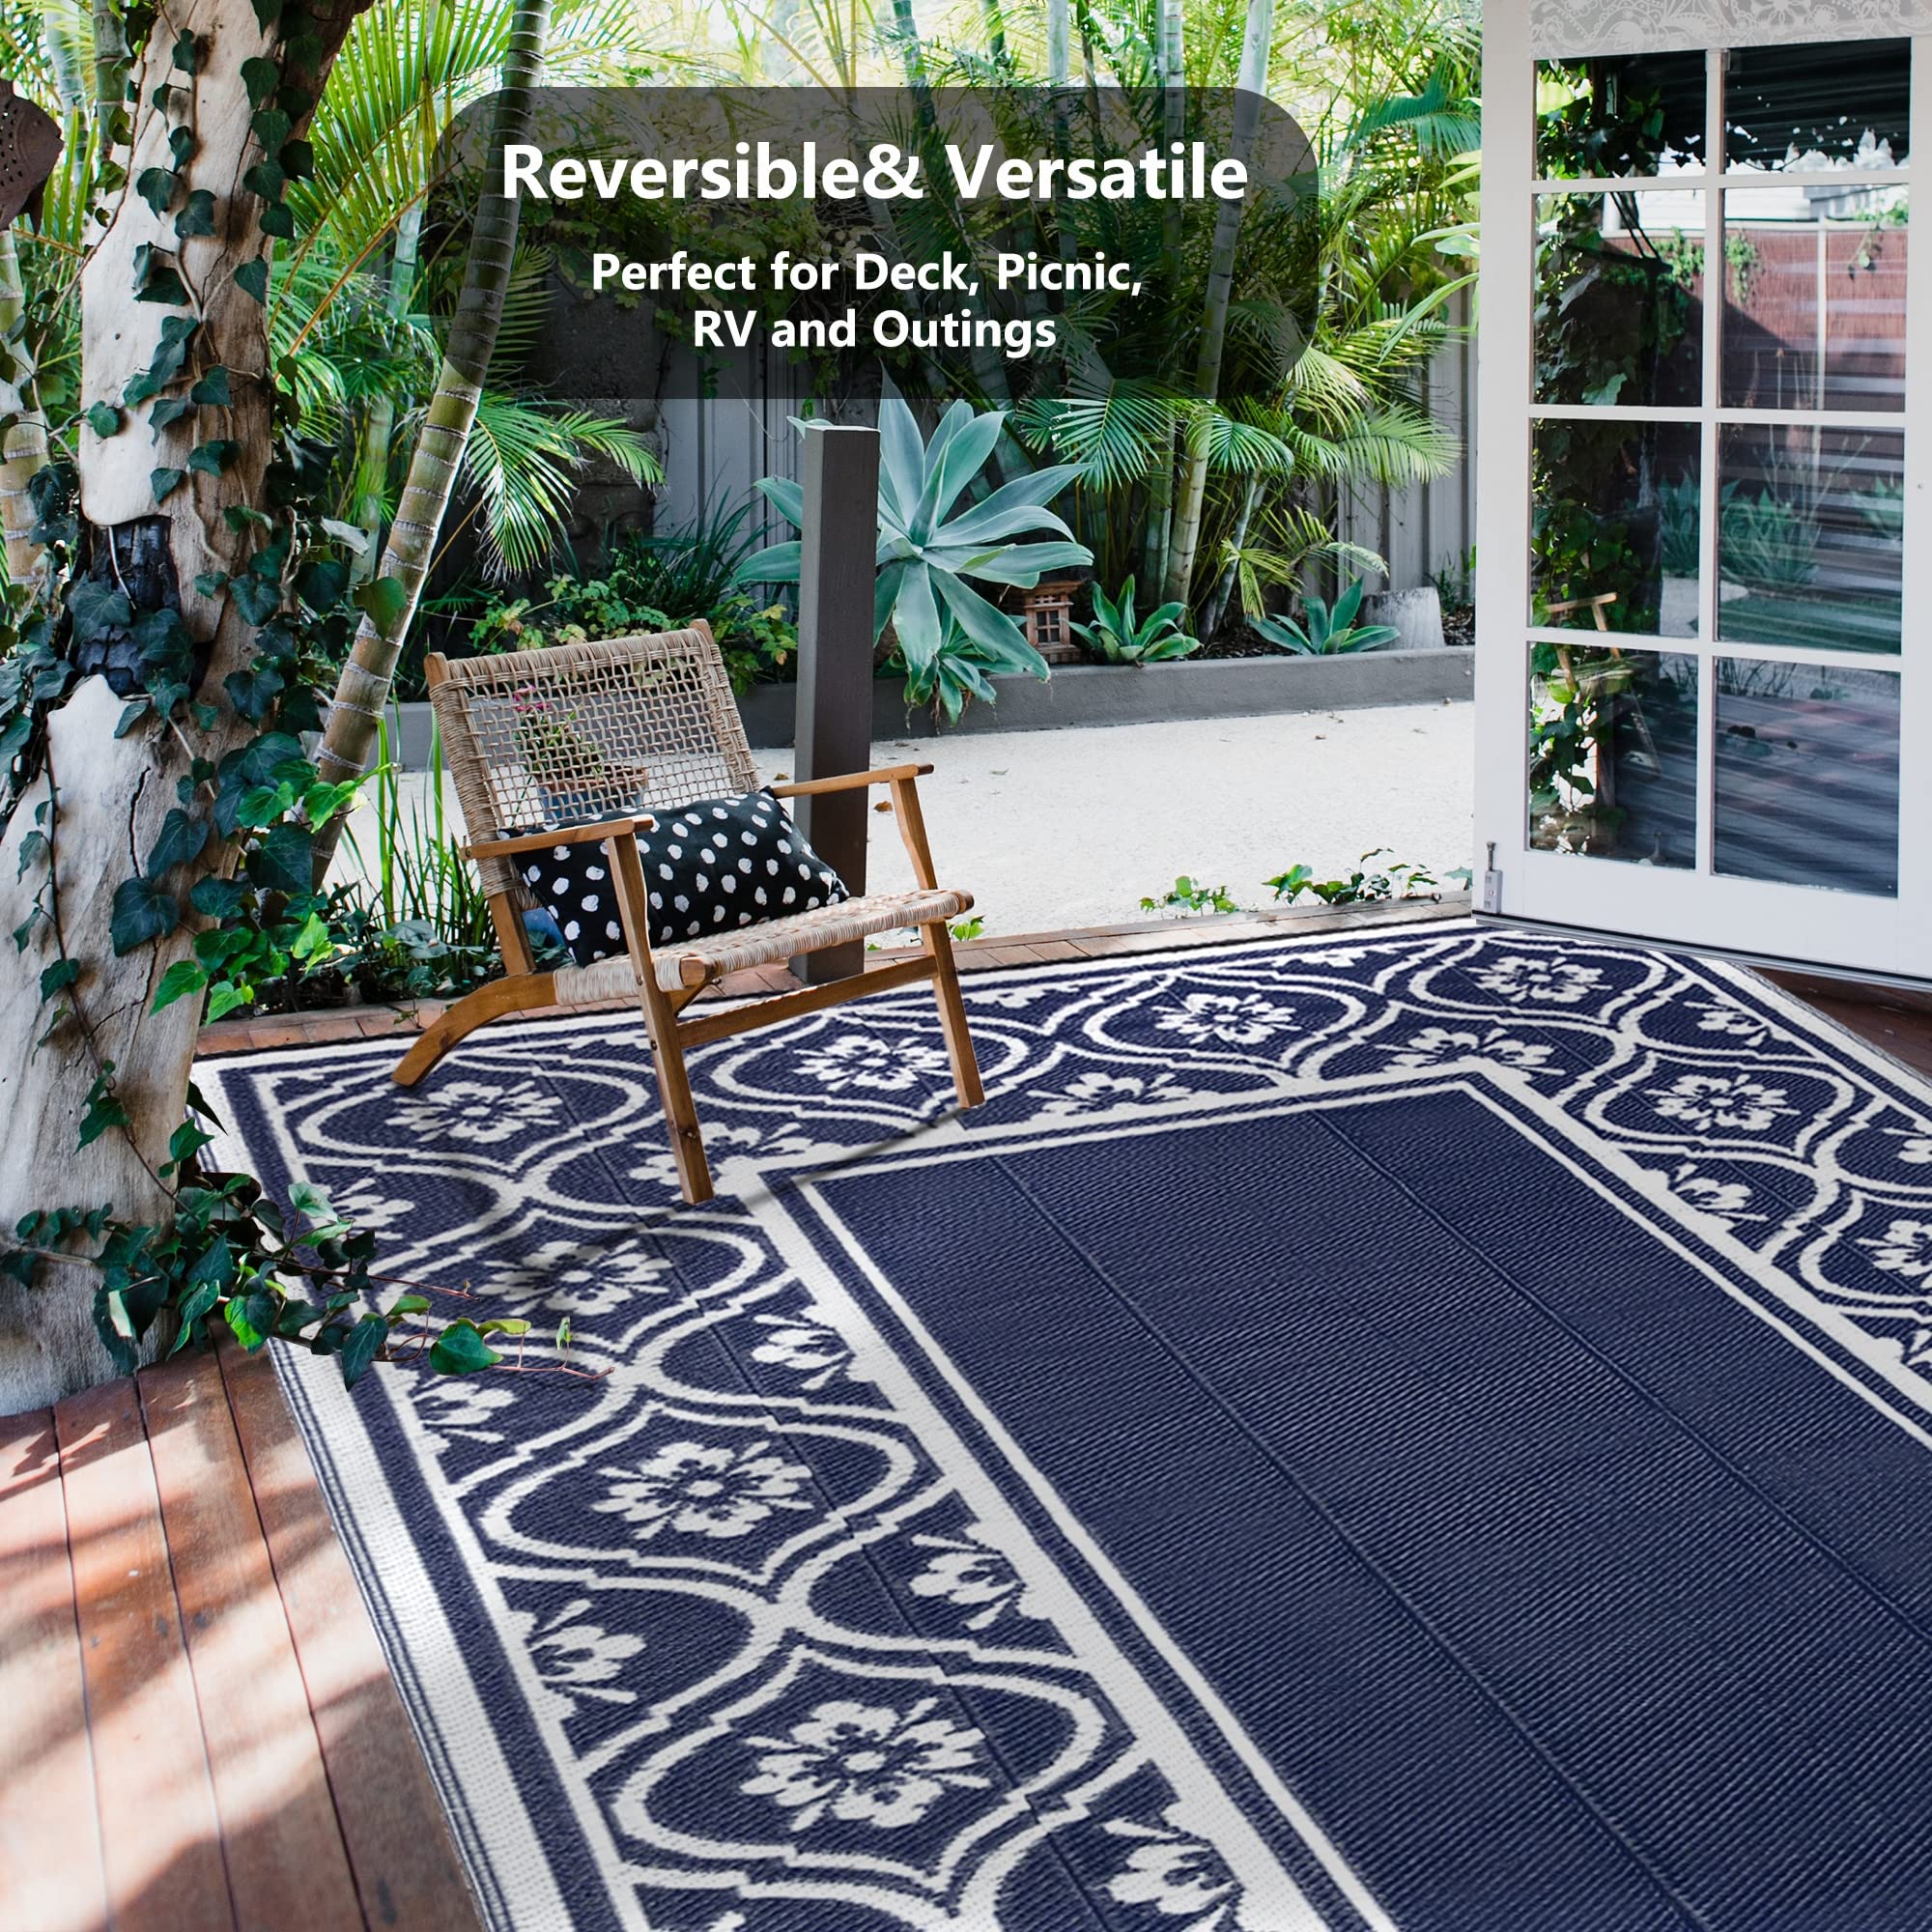 HUGEAR RV Outdoor Rug Waterproof Mat Outdoor Rugs 9'x12' for Patios Clearance Carpet Outdoor Camping Rugs Large Plastic Straw Rug (9x12ft Lantern Navy Blue&White)